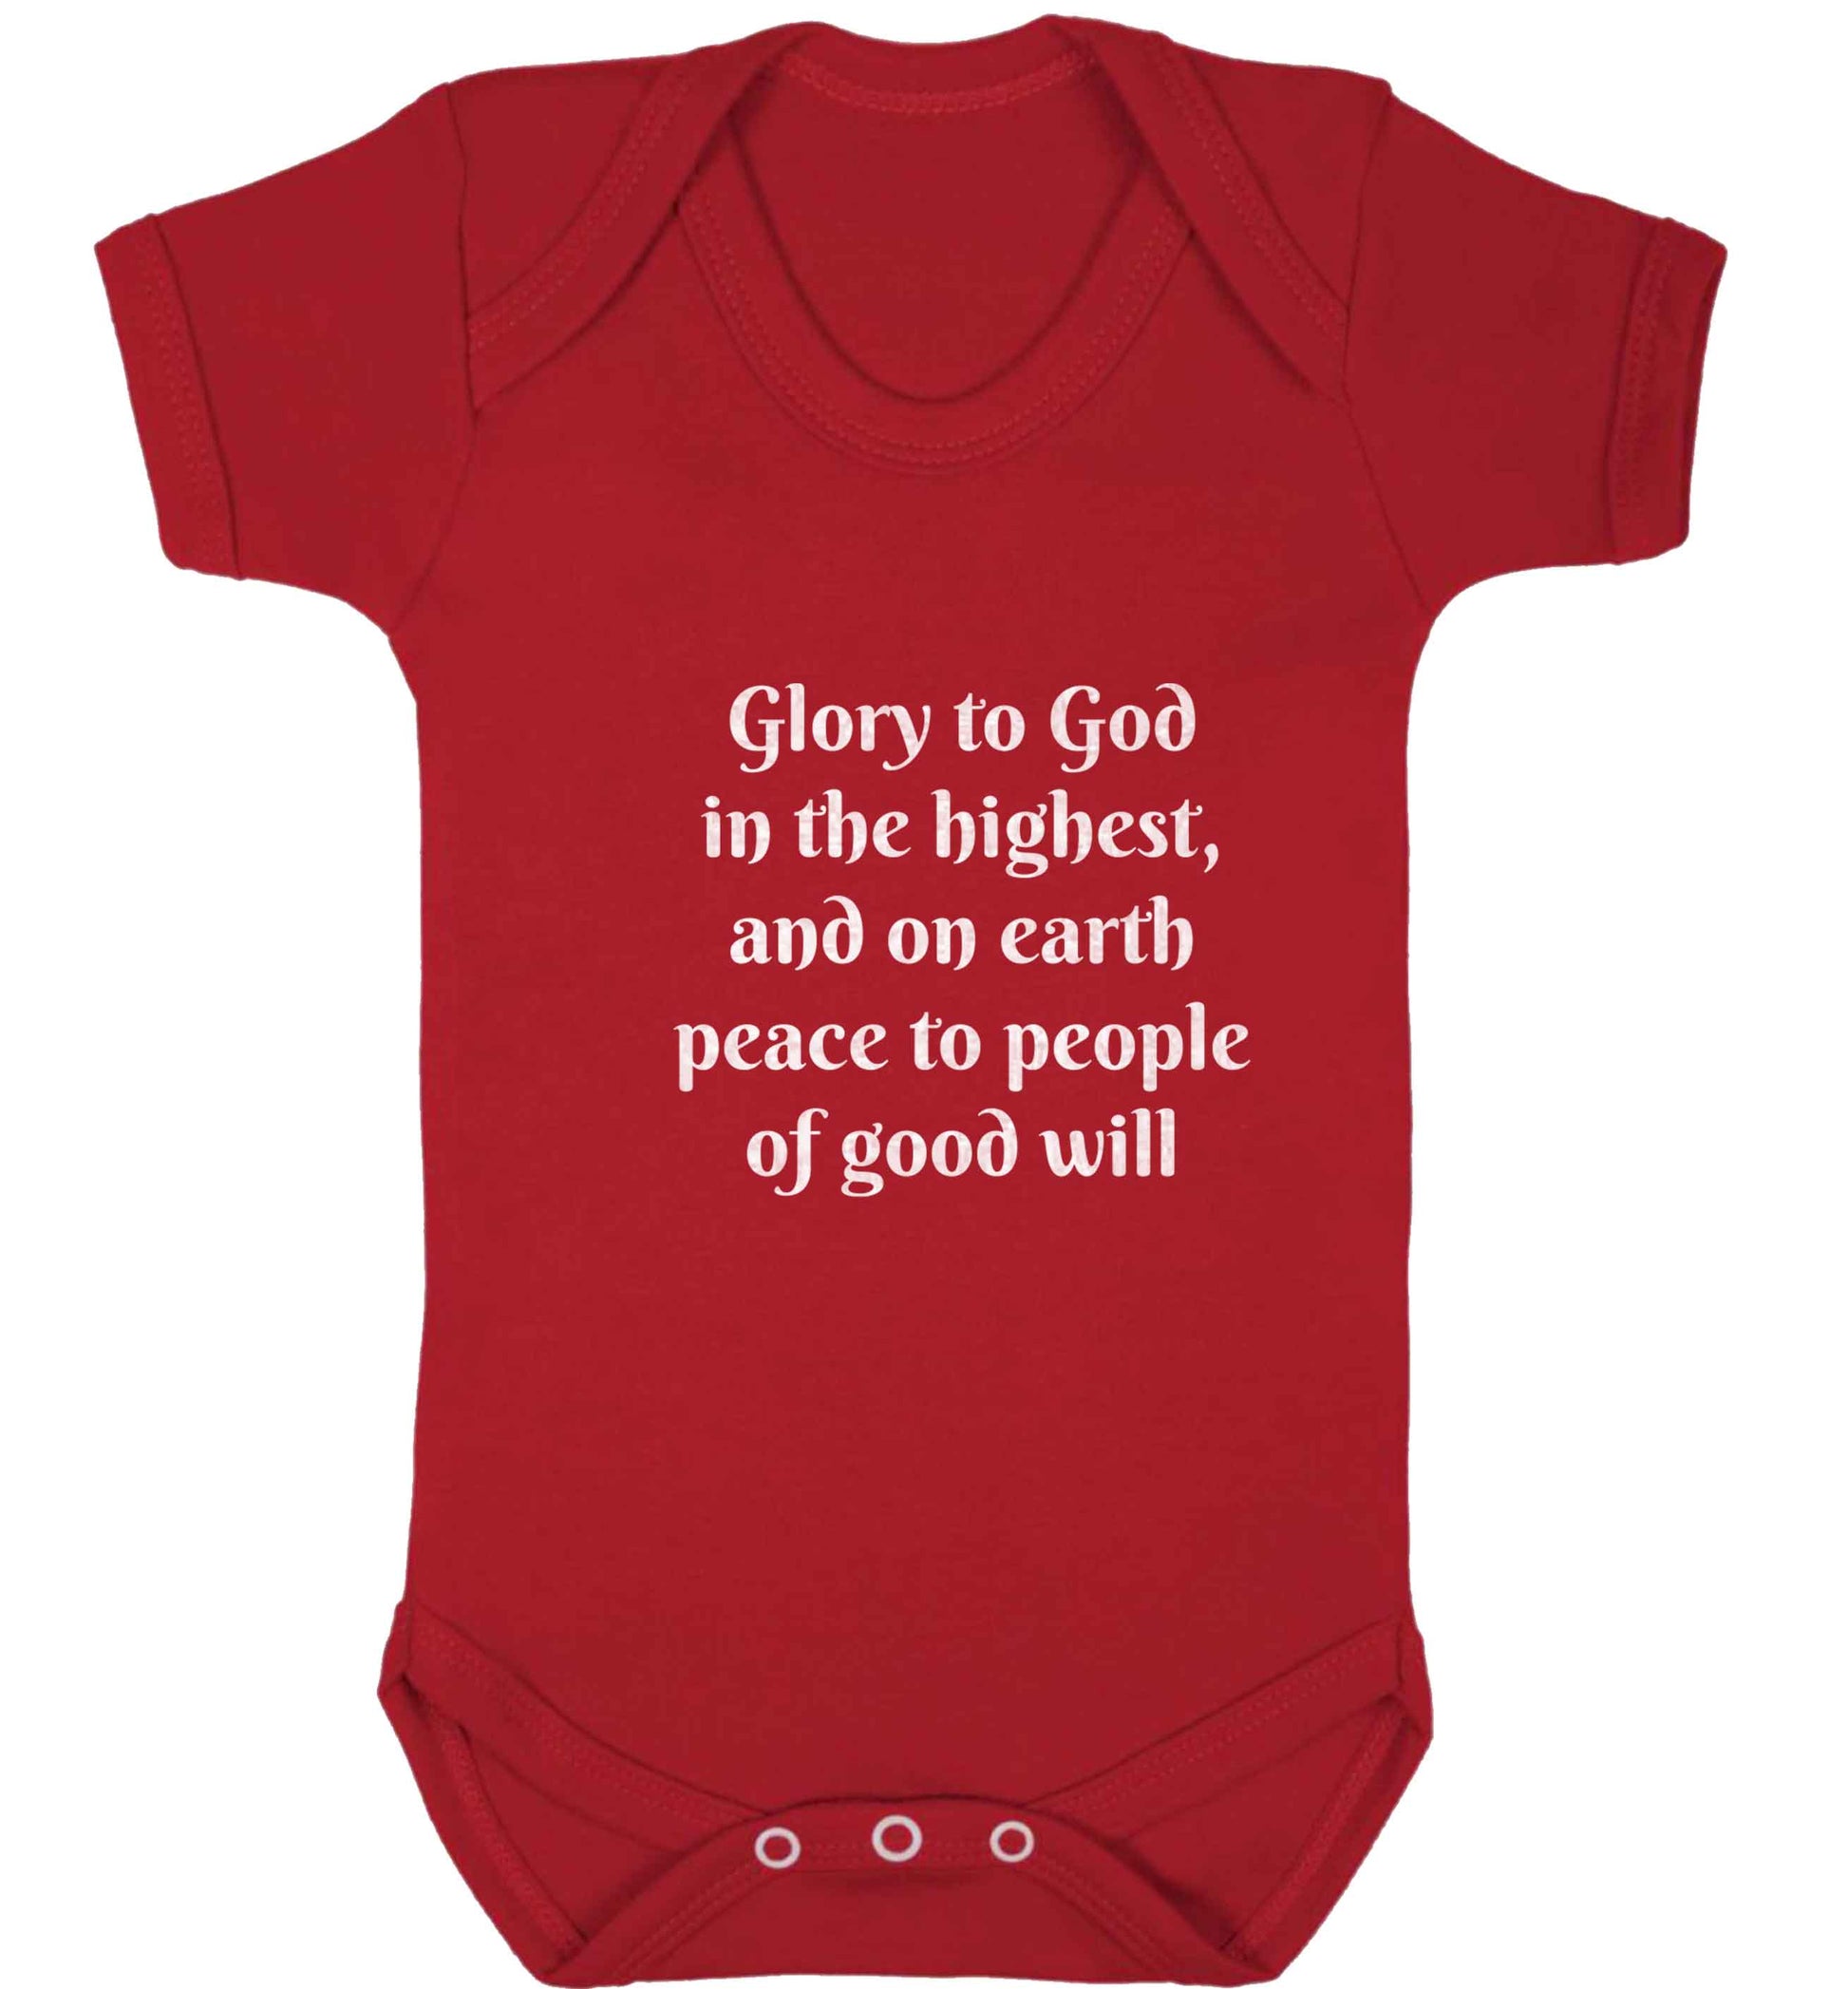 Glory to God in the highest, and on earth peace to people of good will baby vest red 18-24 months